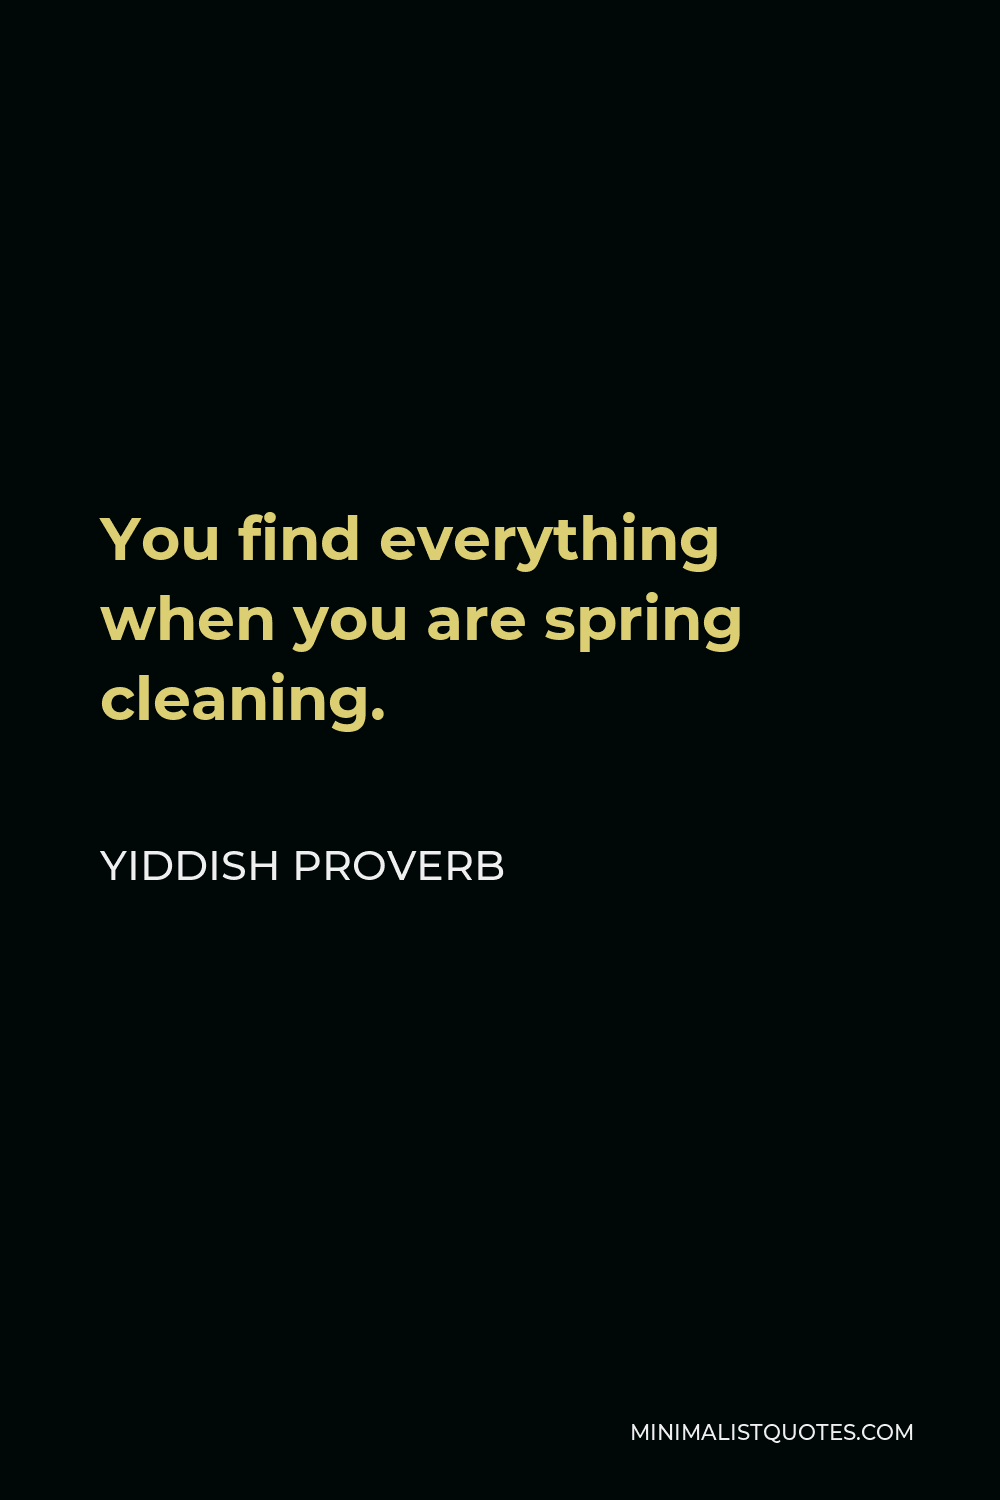 Yiddish Proverb Quote - You find everything when you are spring cleaning.